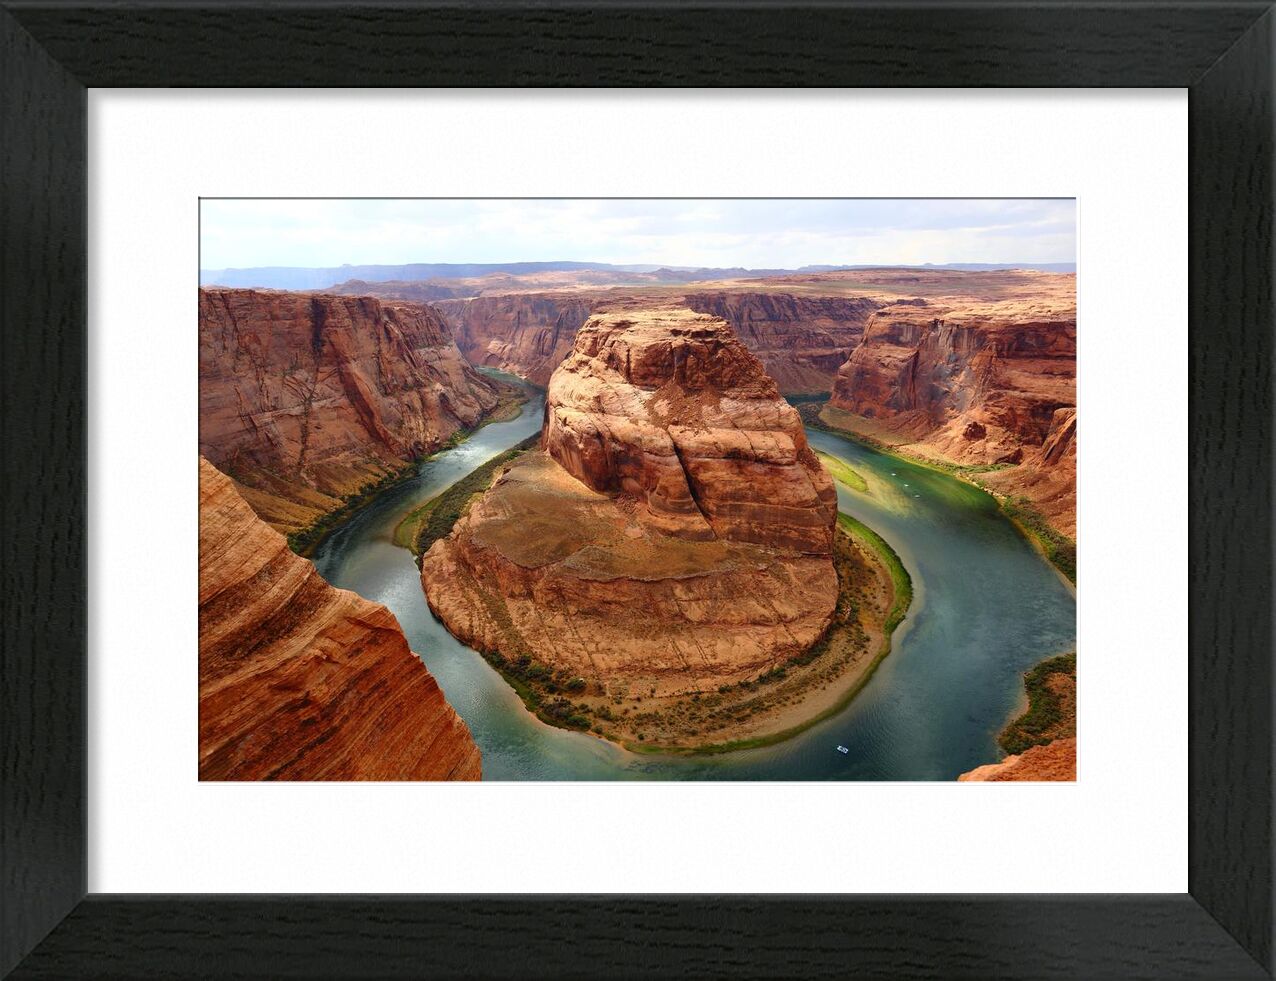 Canyon from Aliss ART, Prodi Art, reservoir, horseshoe bend, horseshoe, famous, erosion, water, valley, travel, scenic, sandstone, rock, River, remote, outdoors, landscape, geology, desert, curve, cliff, canyon